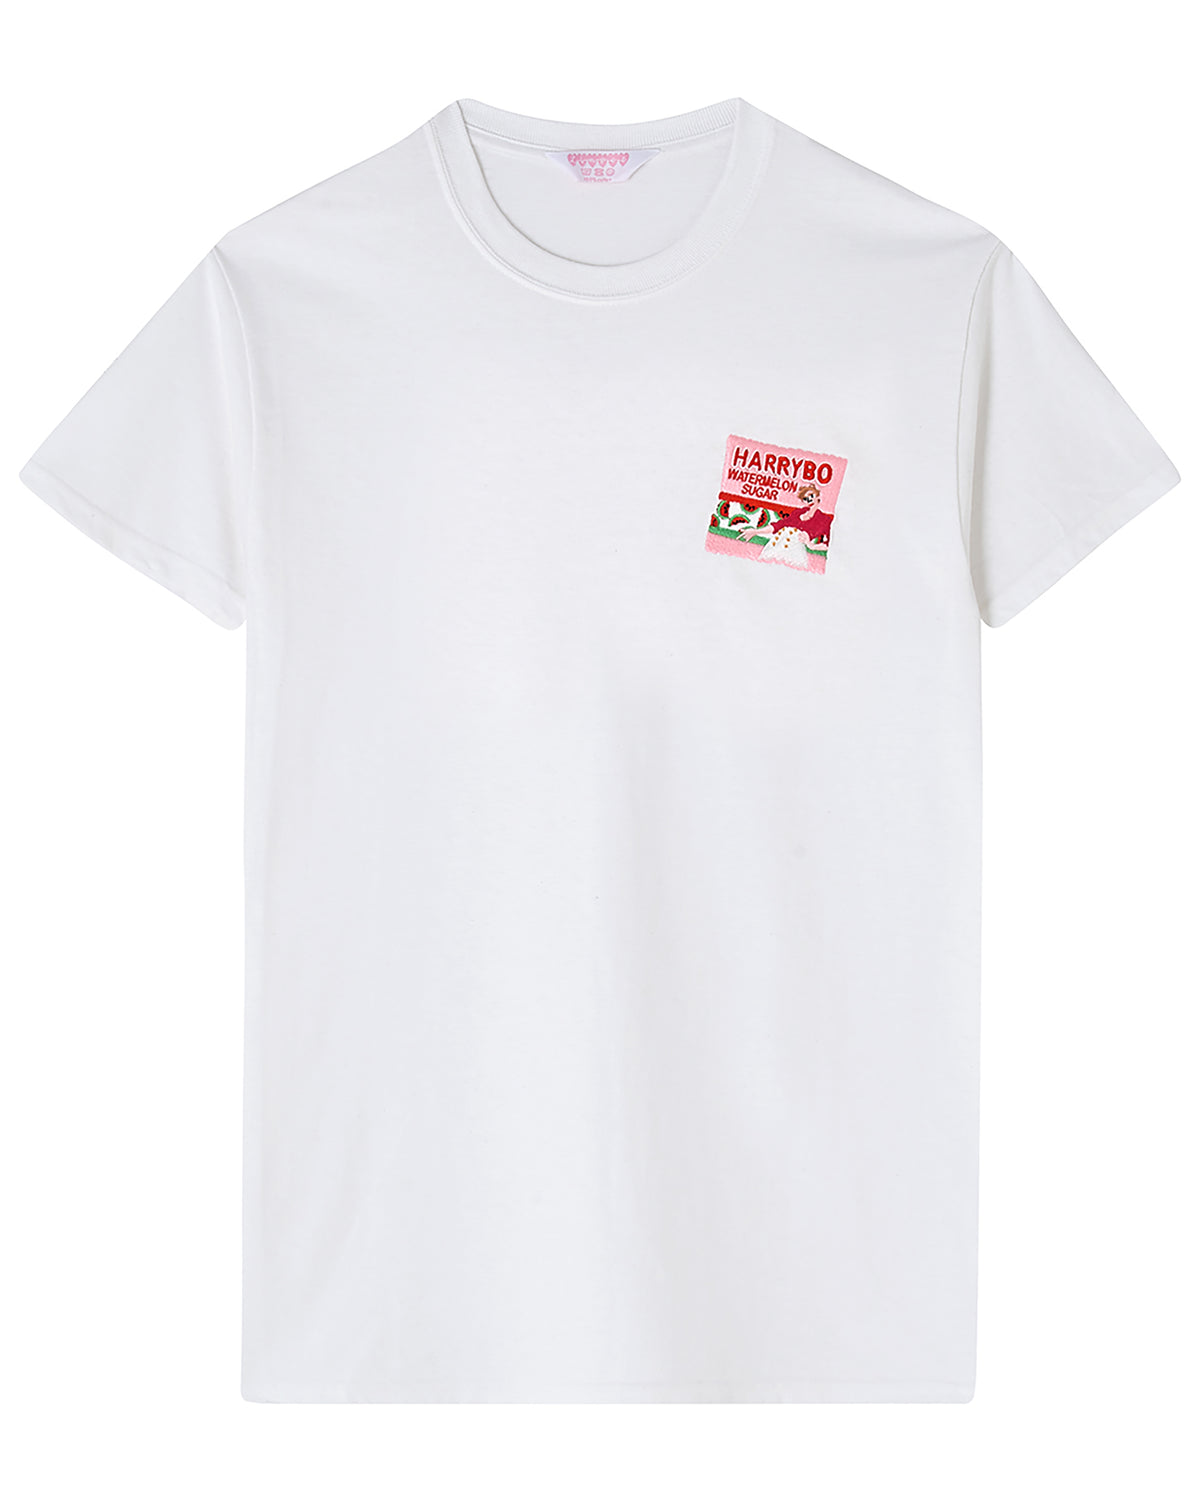 Harrybo Embroidered T-Shirt